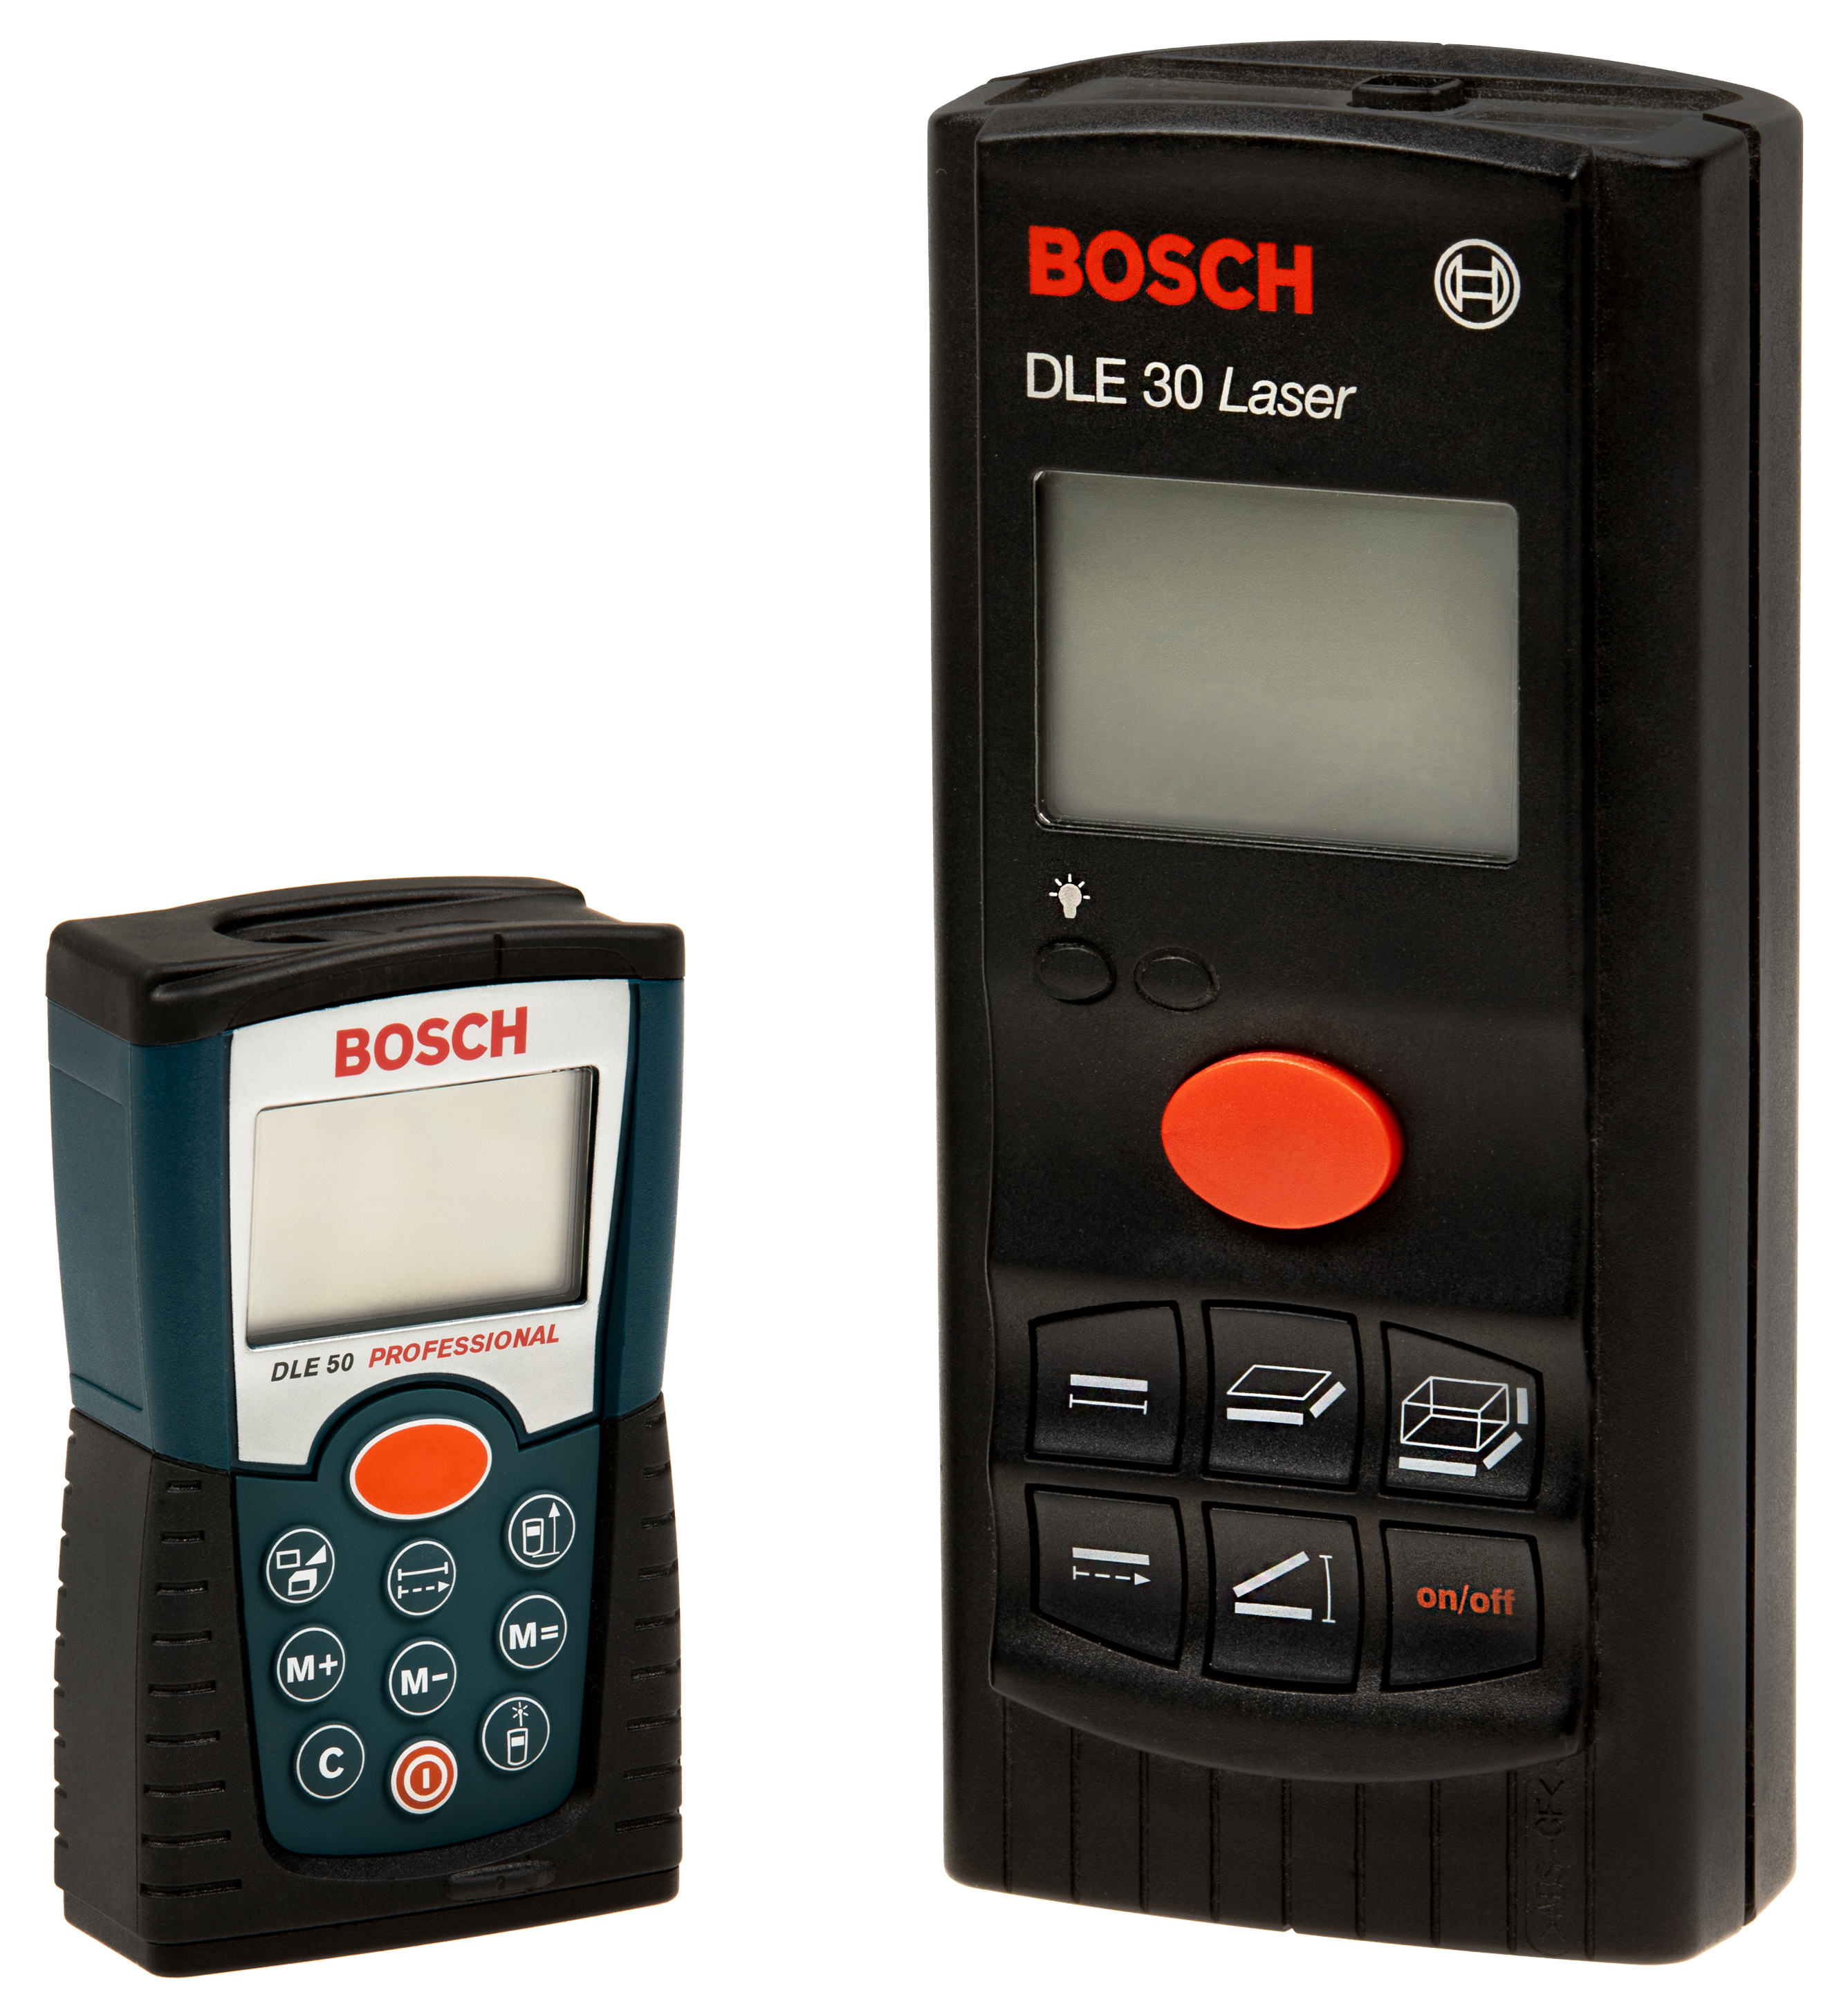 30 years of measuring tools from Bosch: From a niche product to a tool for everyone